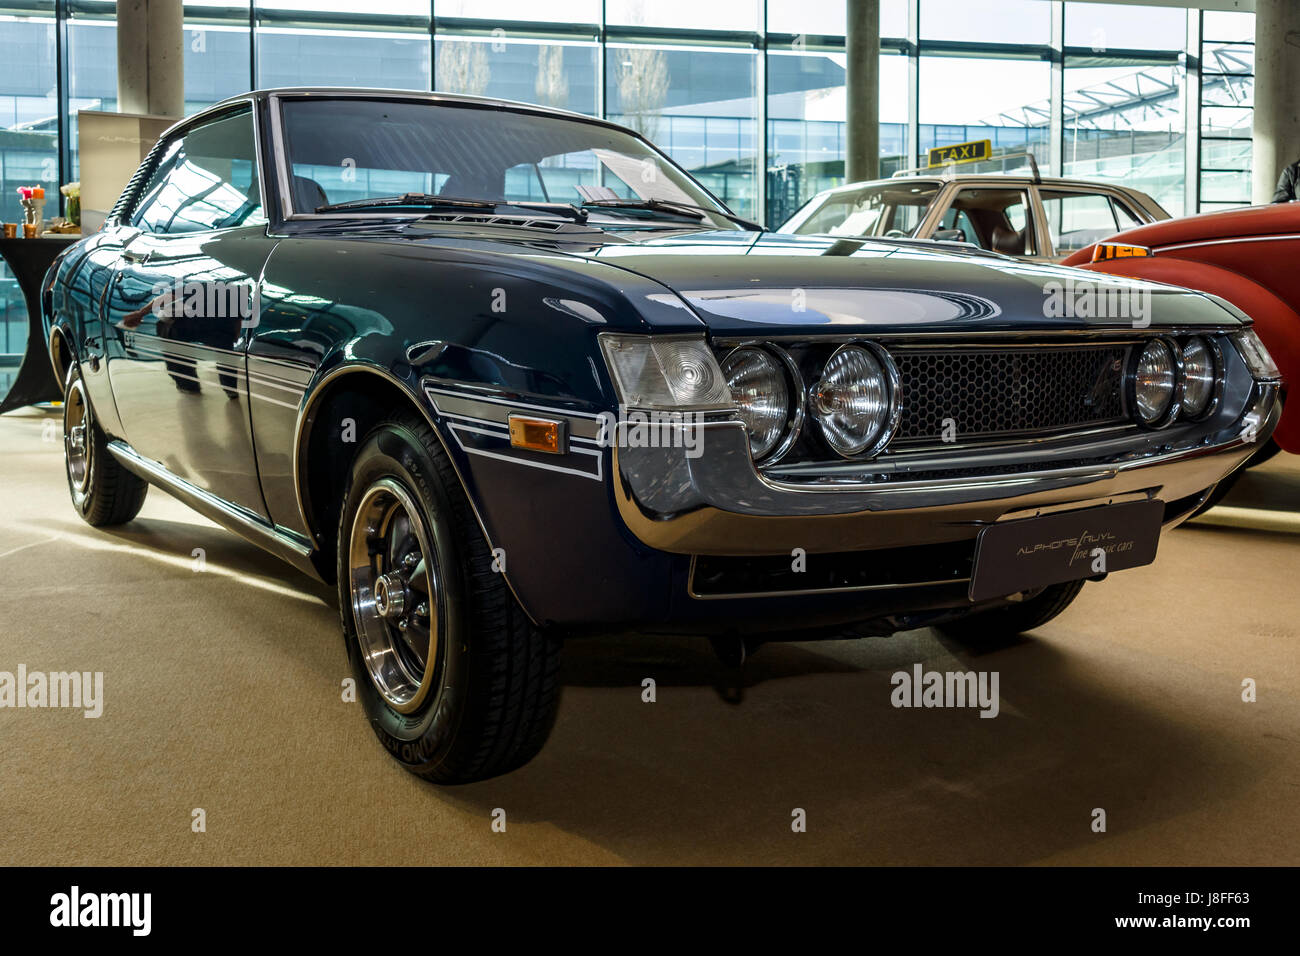 STUTTGART, GERMANY - MARCH 04, 2017: Sports car Toyota Celica Coupe 1600 GT, 1974. Europe's greatest classic car exhibition 'RETRO CLASSICS' Stock Photo